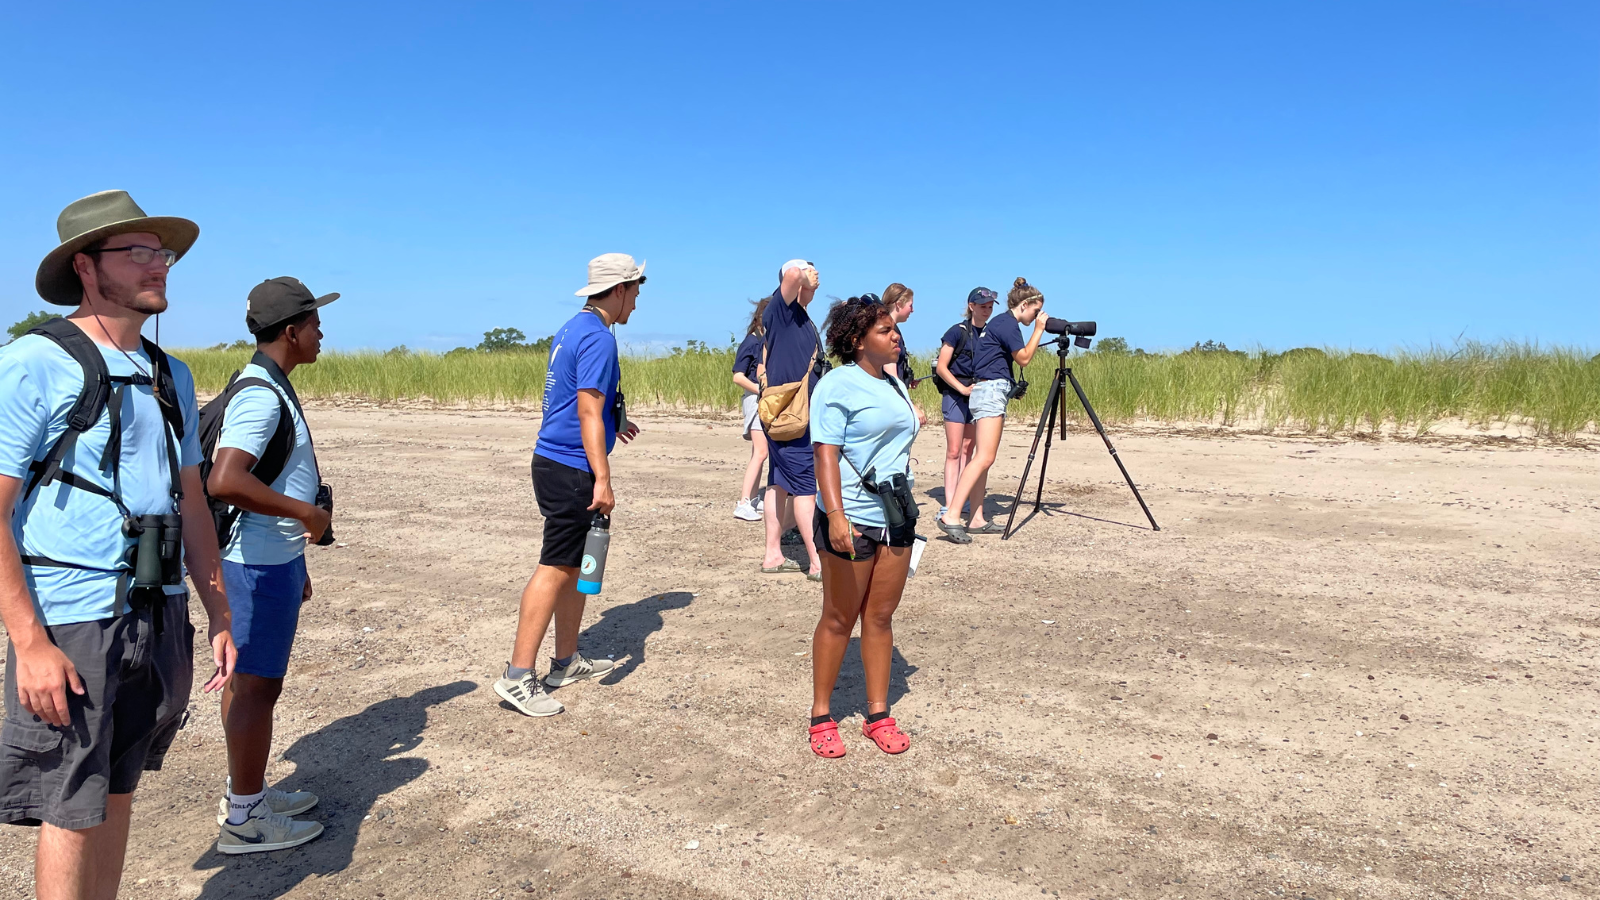 WildLife Guards and Junior Forest Technicians stand on a beach, spread out and using binoculars and guides to identify birds that are not visible in the photo.